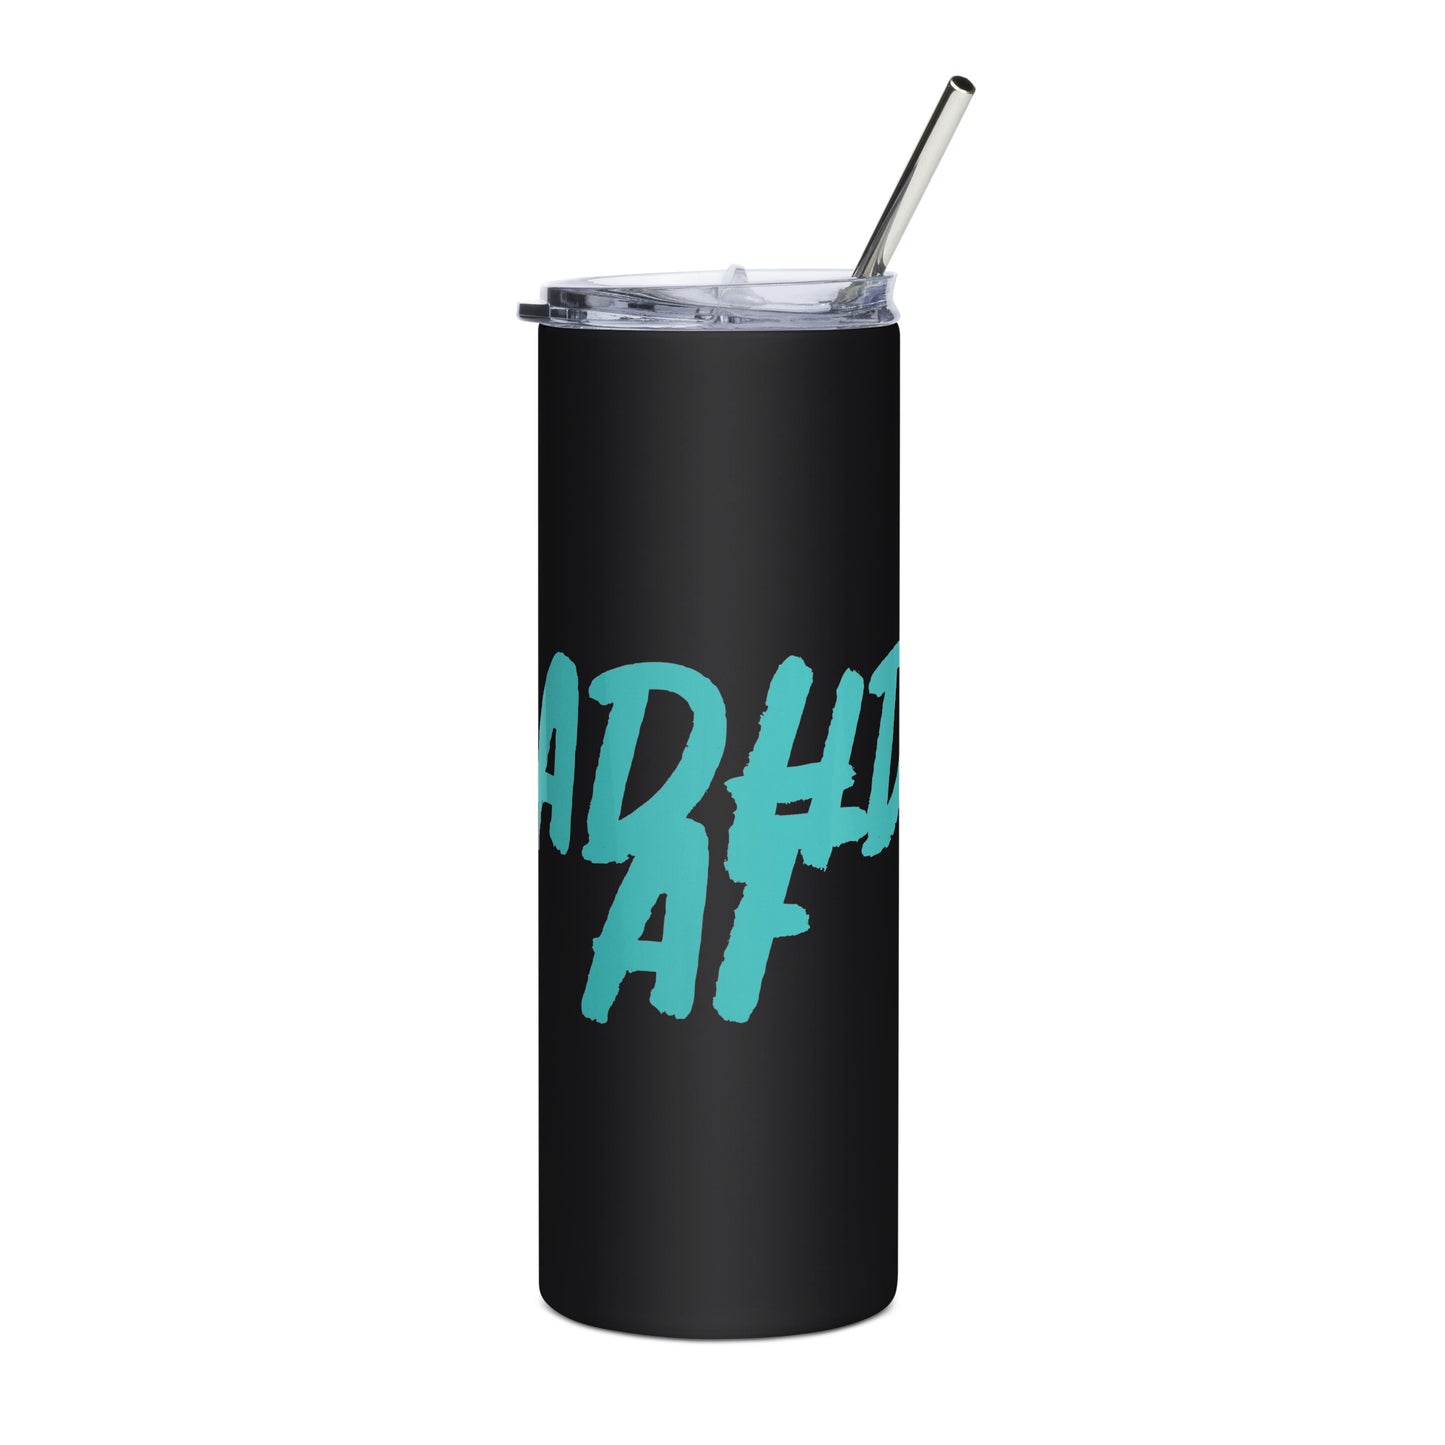 ADHD AF Stainless steel tumbler